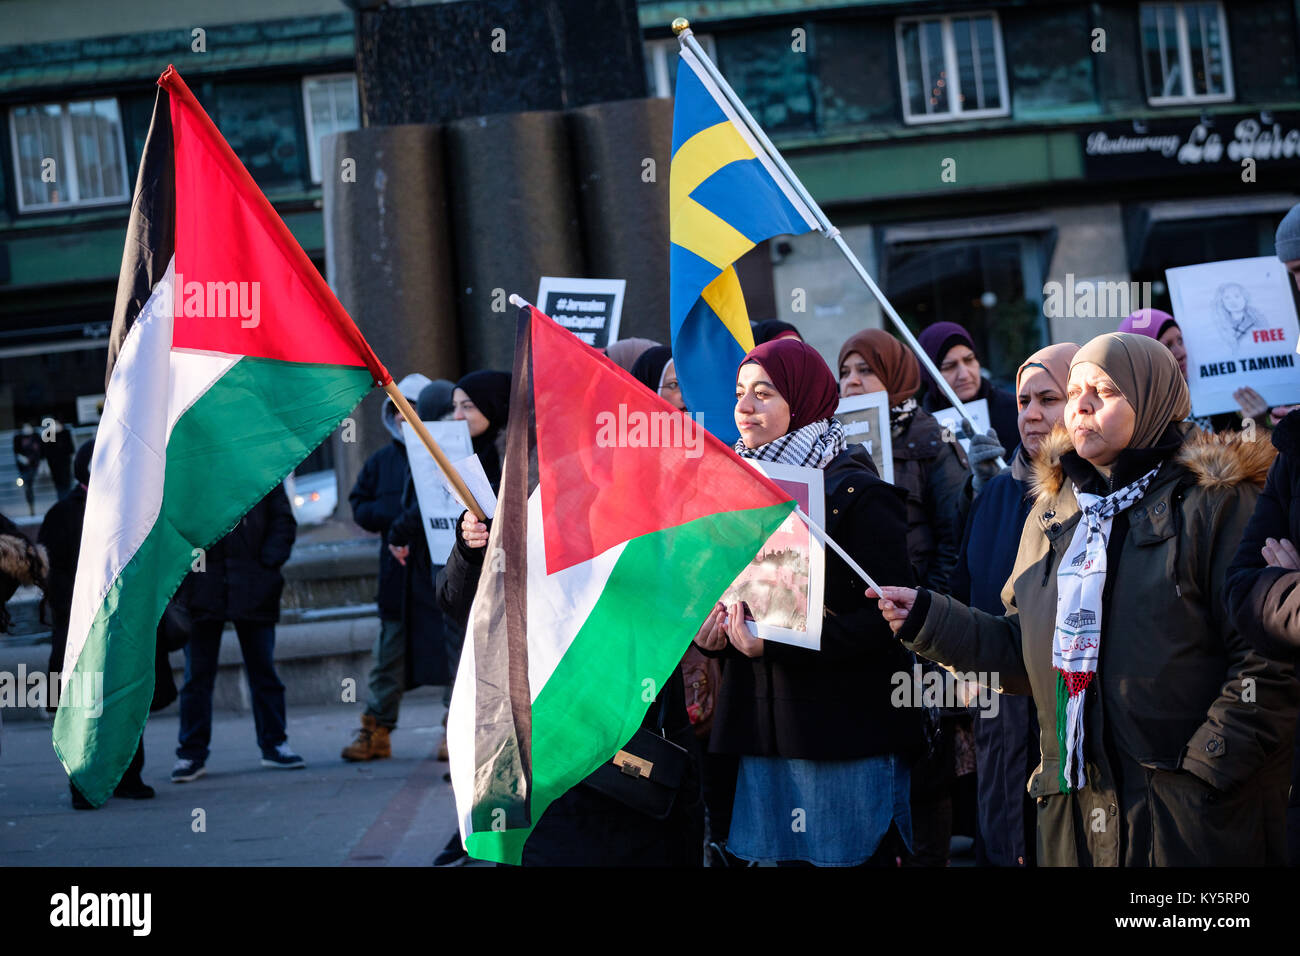 January 7, 2018 - MalmÃ, SkÃ¥ne, Sweden - Palestinian flags are being displayed during the rally.Demonstration of protest against the decision of Donald Trump, in violation of the international right, to recognize Jerusalem as capital of Israel hosted in the city of Malmo. Credit: Magnus Persson/SOPA/ZUMA Wire/Alamy Live News Stock Photo